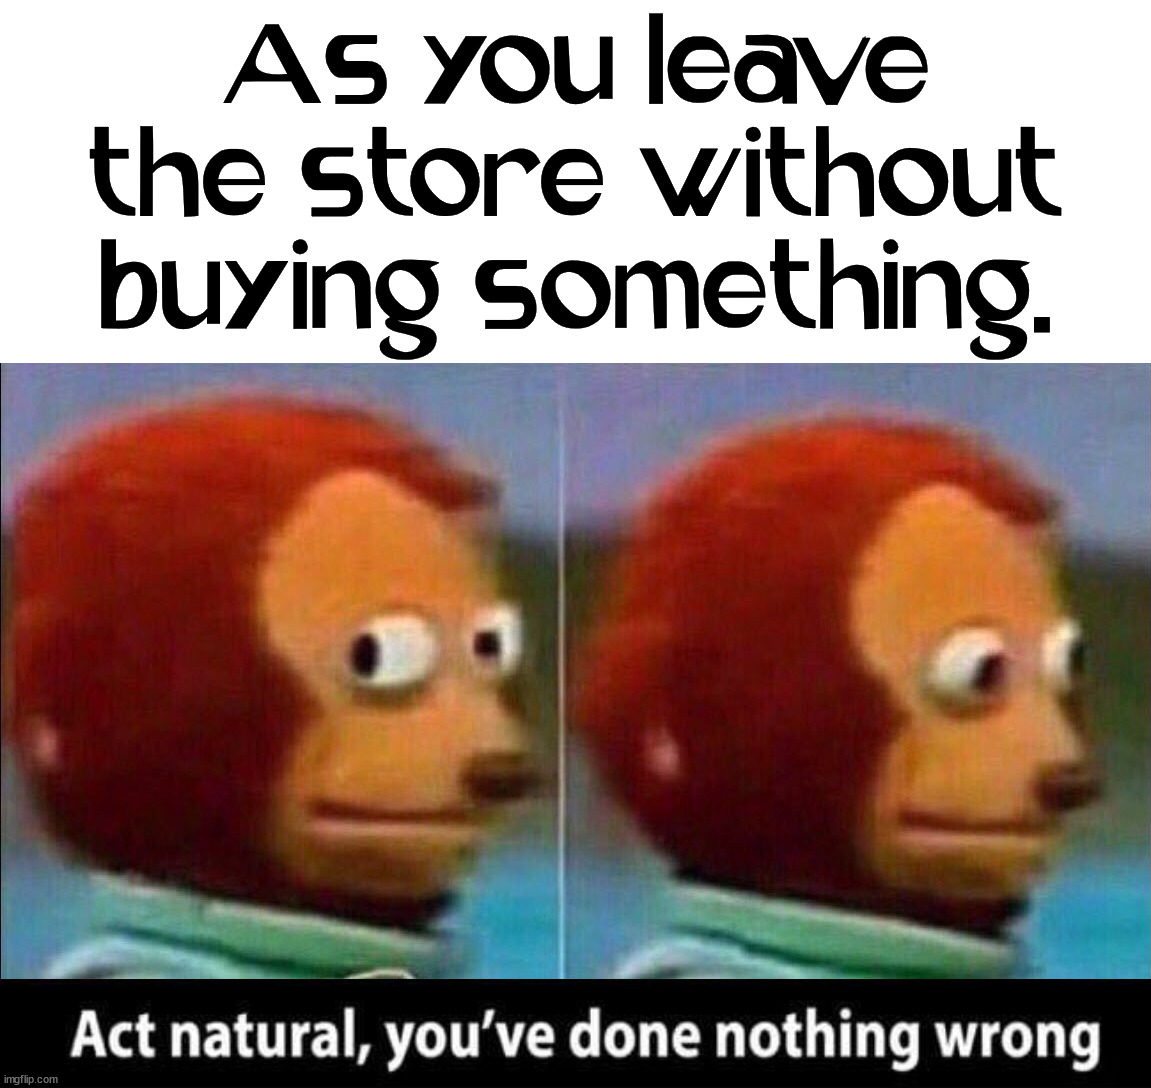 Always feels like I done something wrong or them thinking I stole something |  As you leave the store without buying something. | image tagged in monkey looking away,shopping,scared,guilty | made w/ Imgflip meme maker